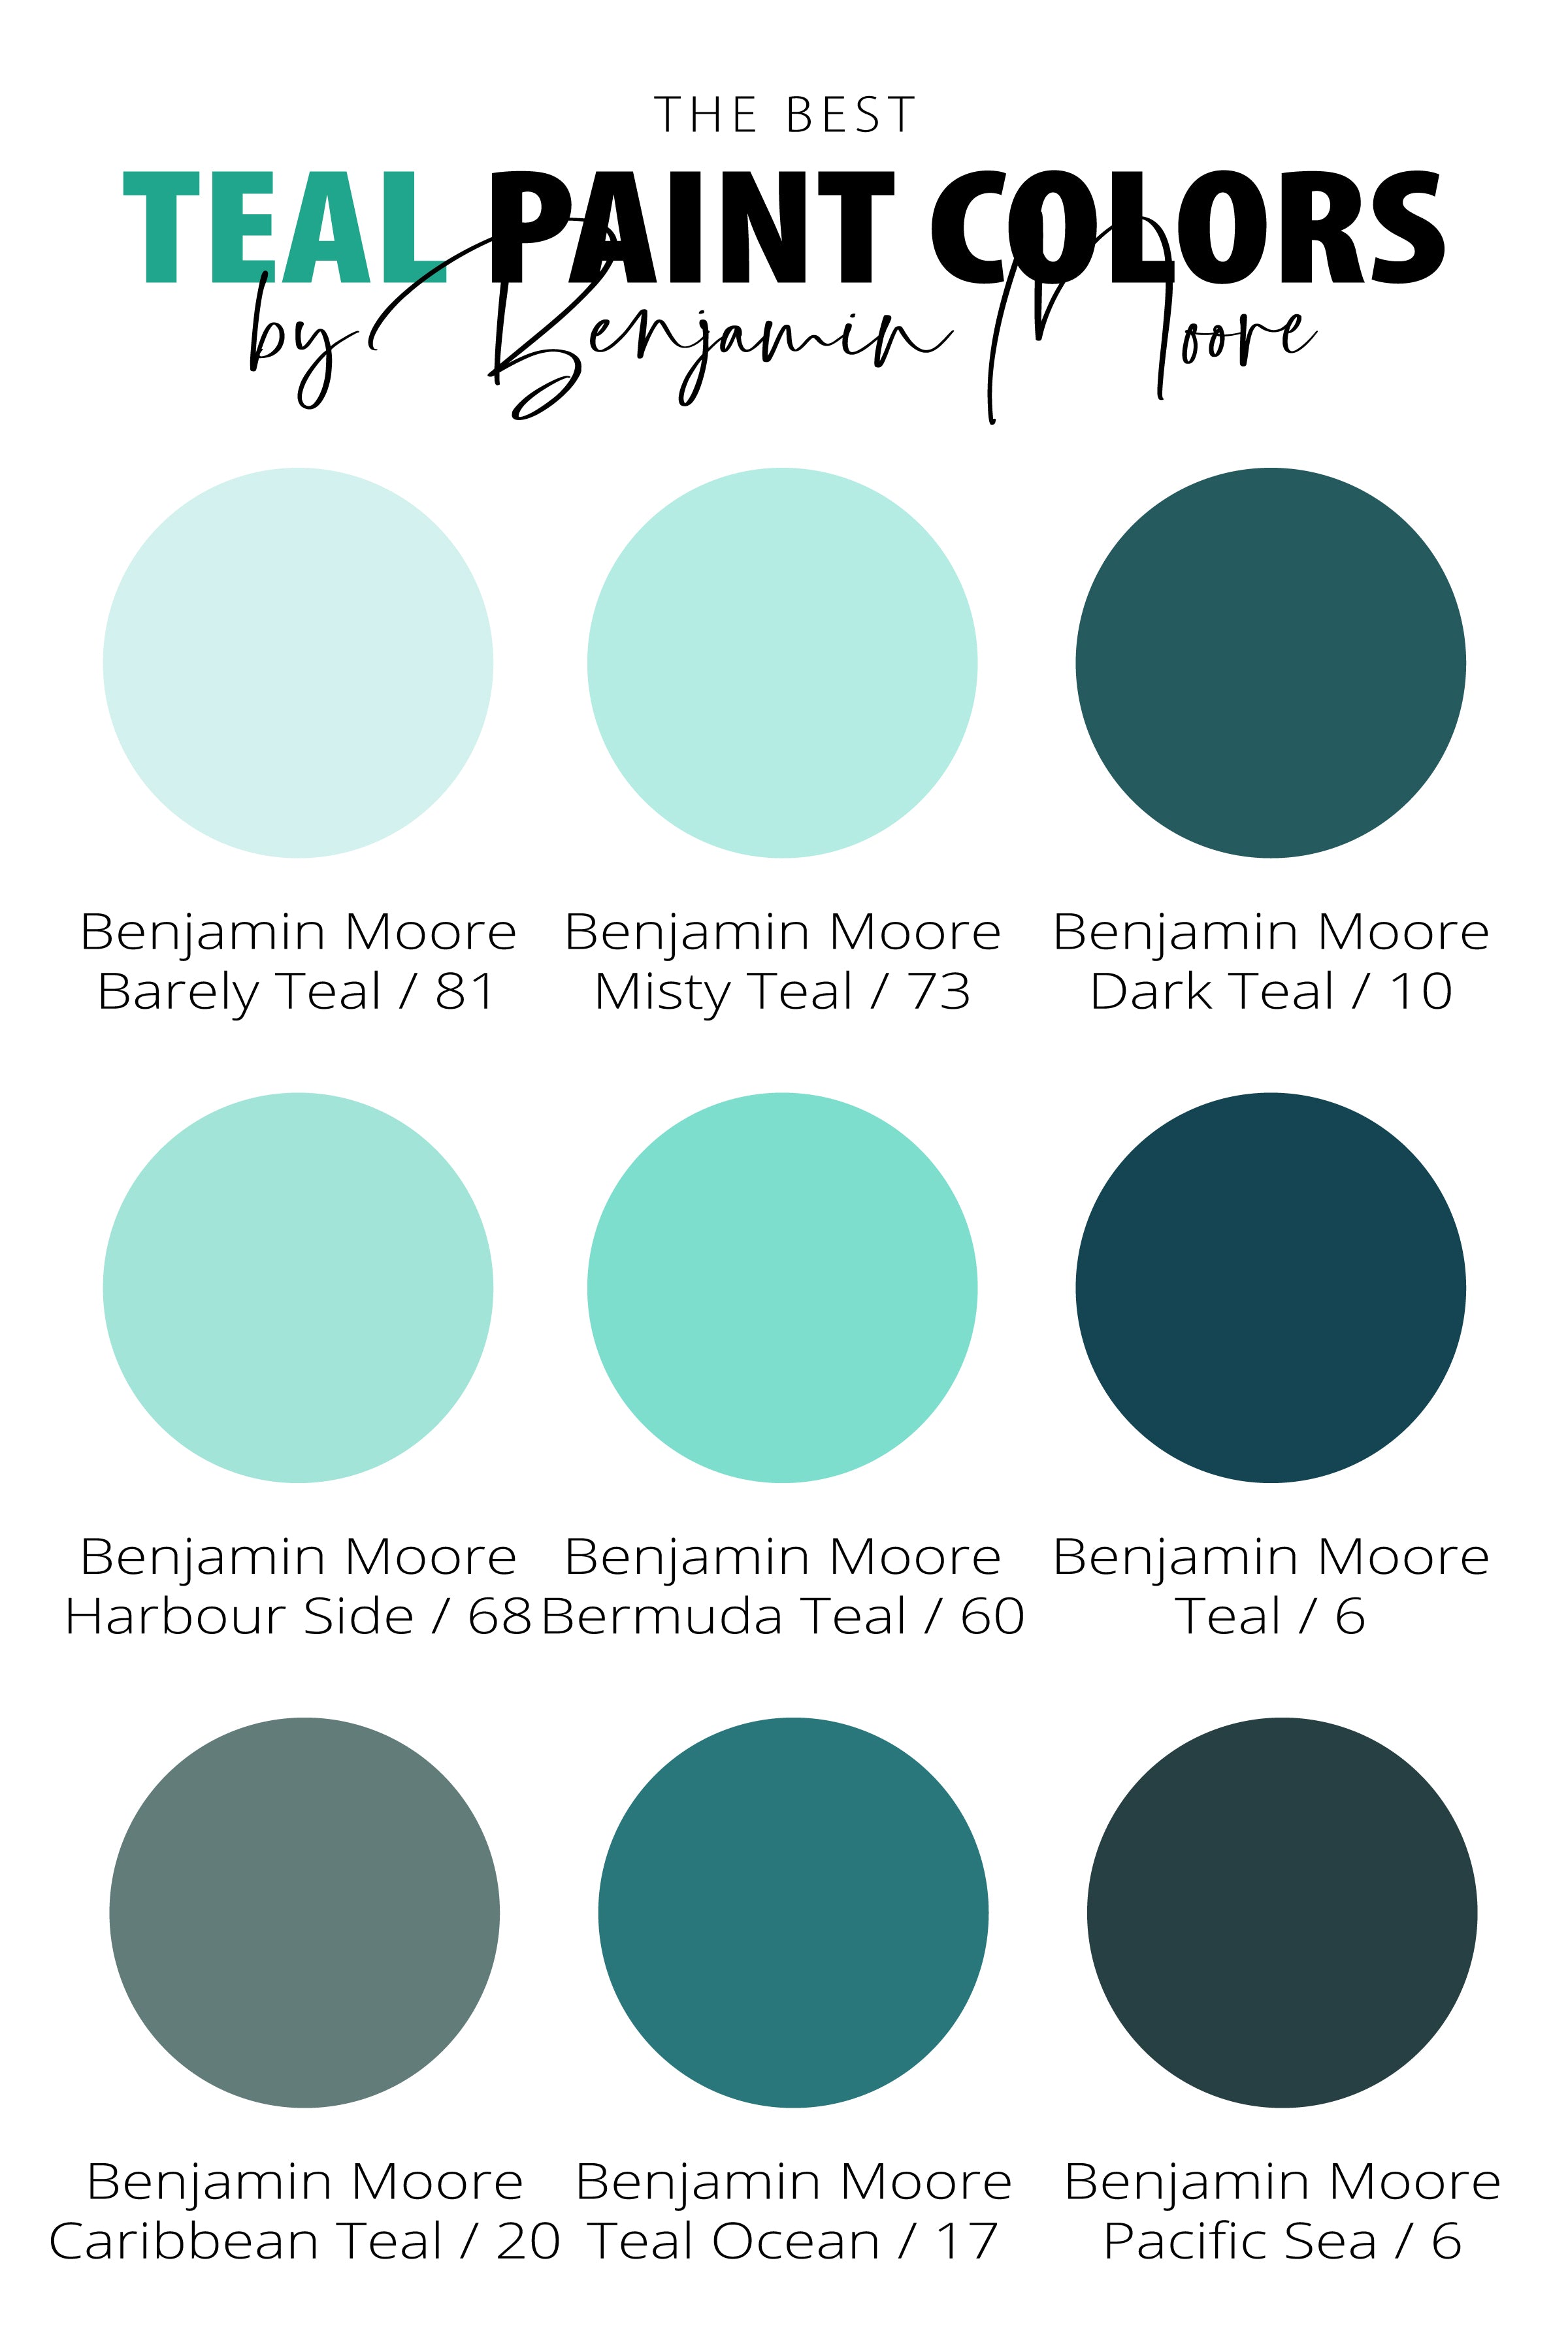 Best-Teal-Paint-Colors-with-Names-Colors-LRV-values-by-Benjamin-Moore